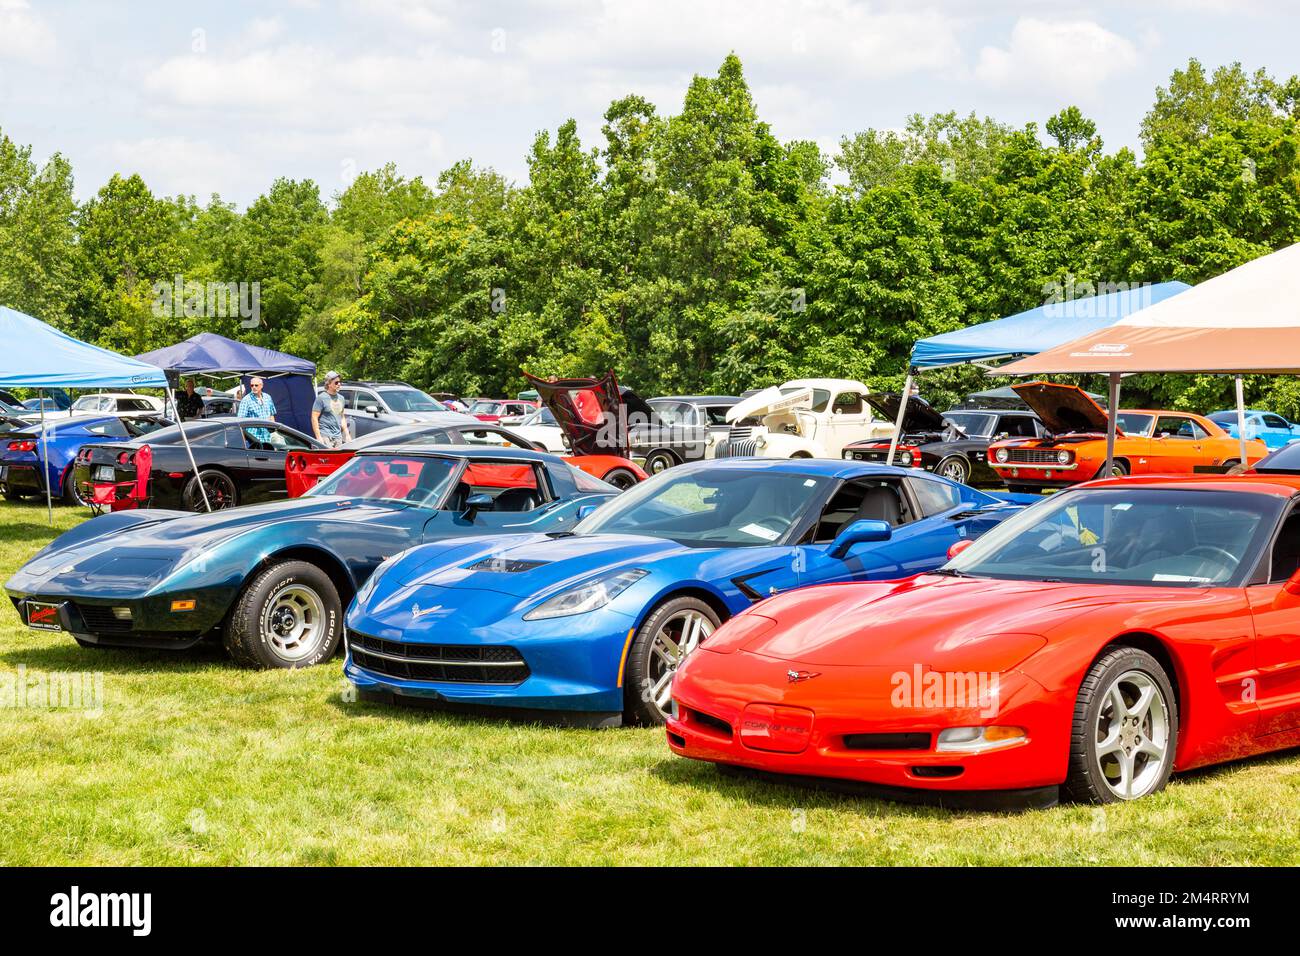 Chevrolet Corvettes on display at a car show in Fort Wayne, Indiana, USA. Stock Photo